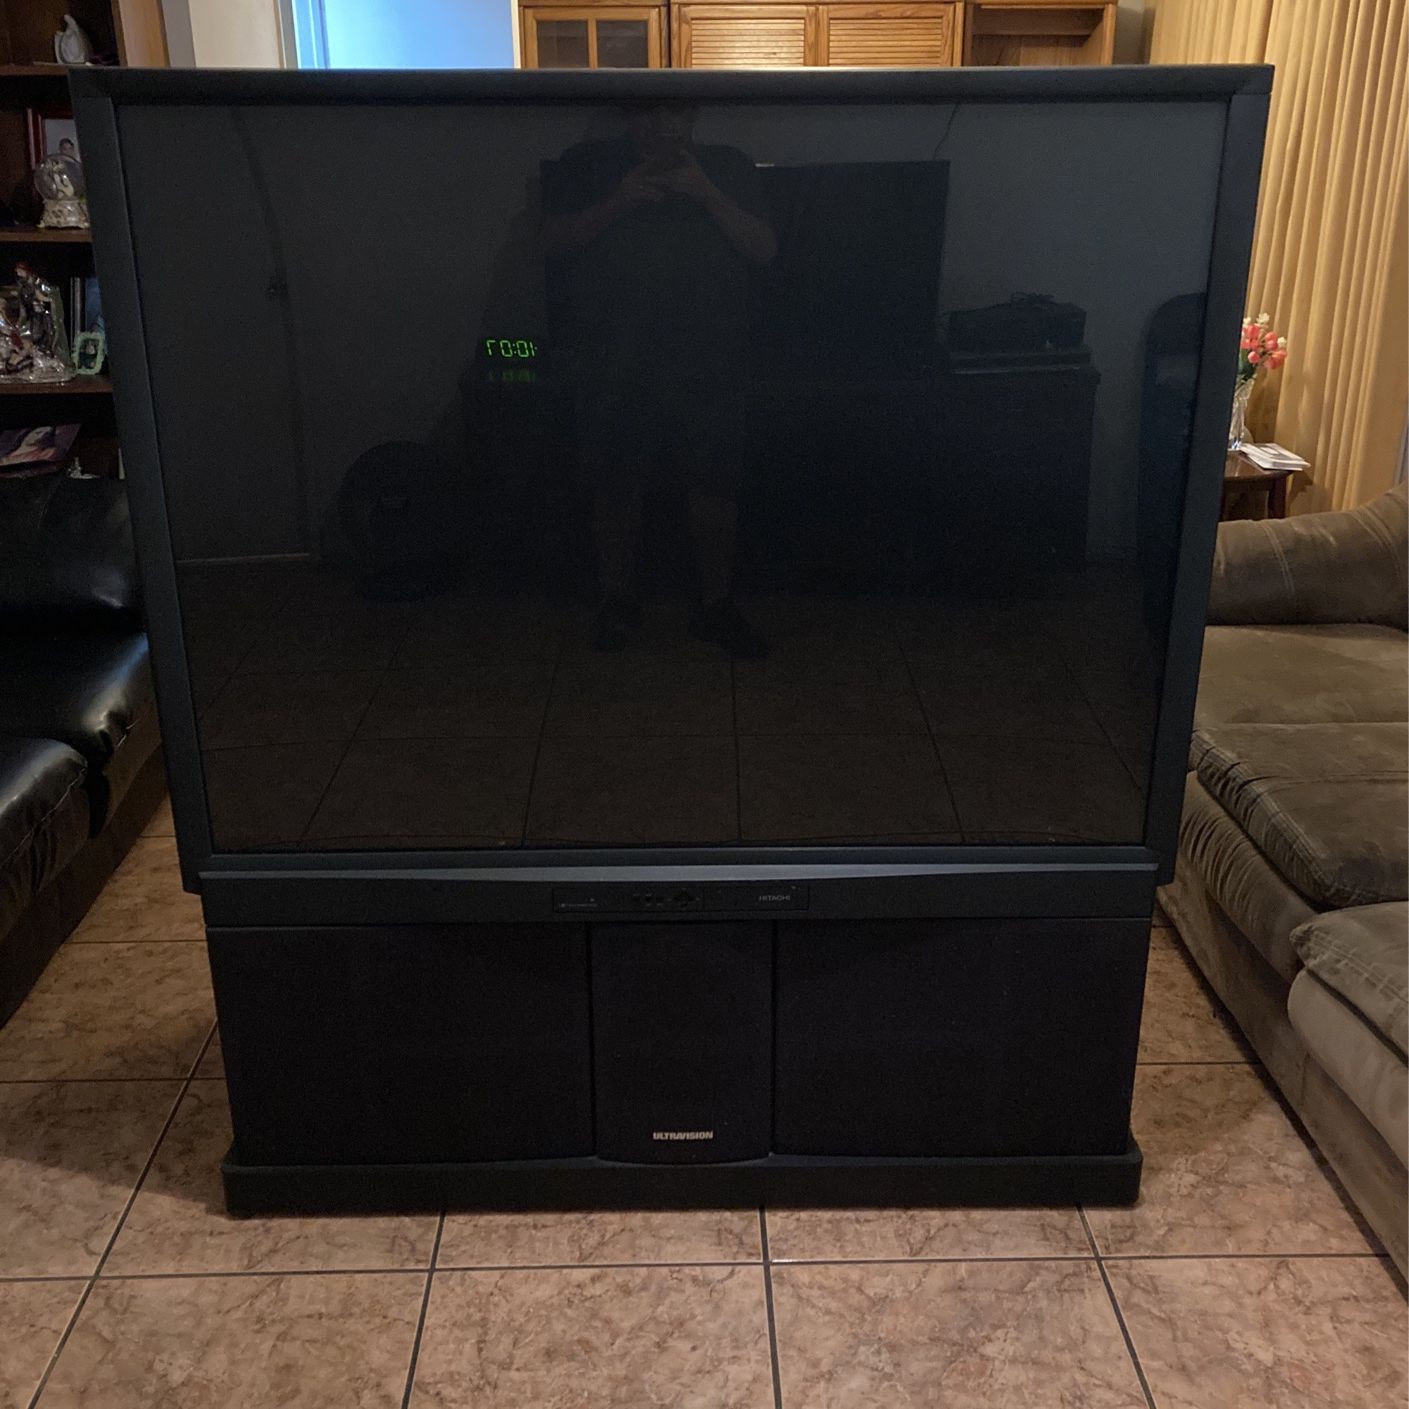 What To Do With Old Projection TV